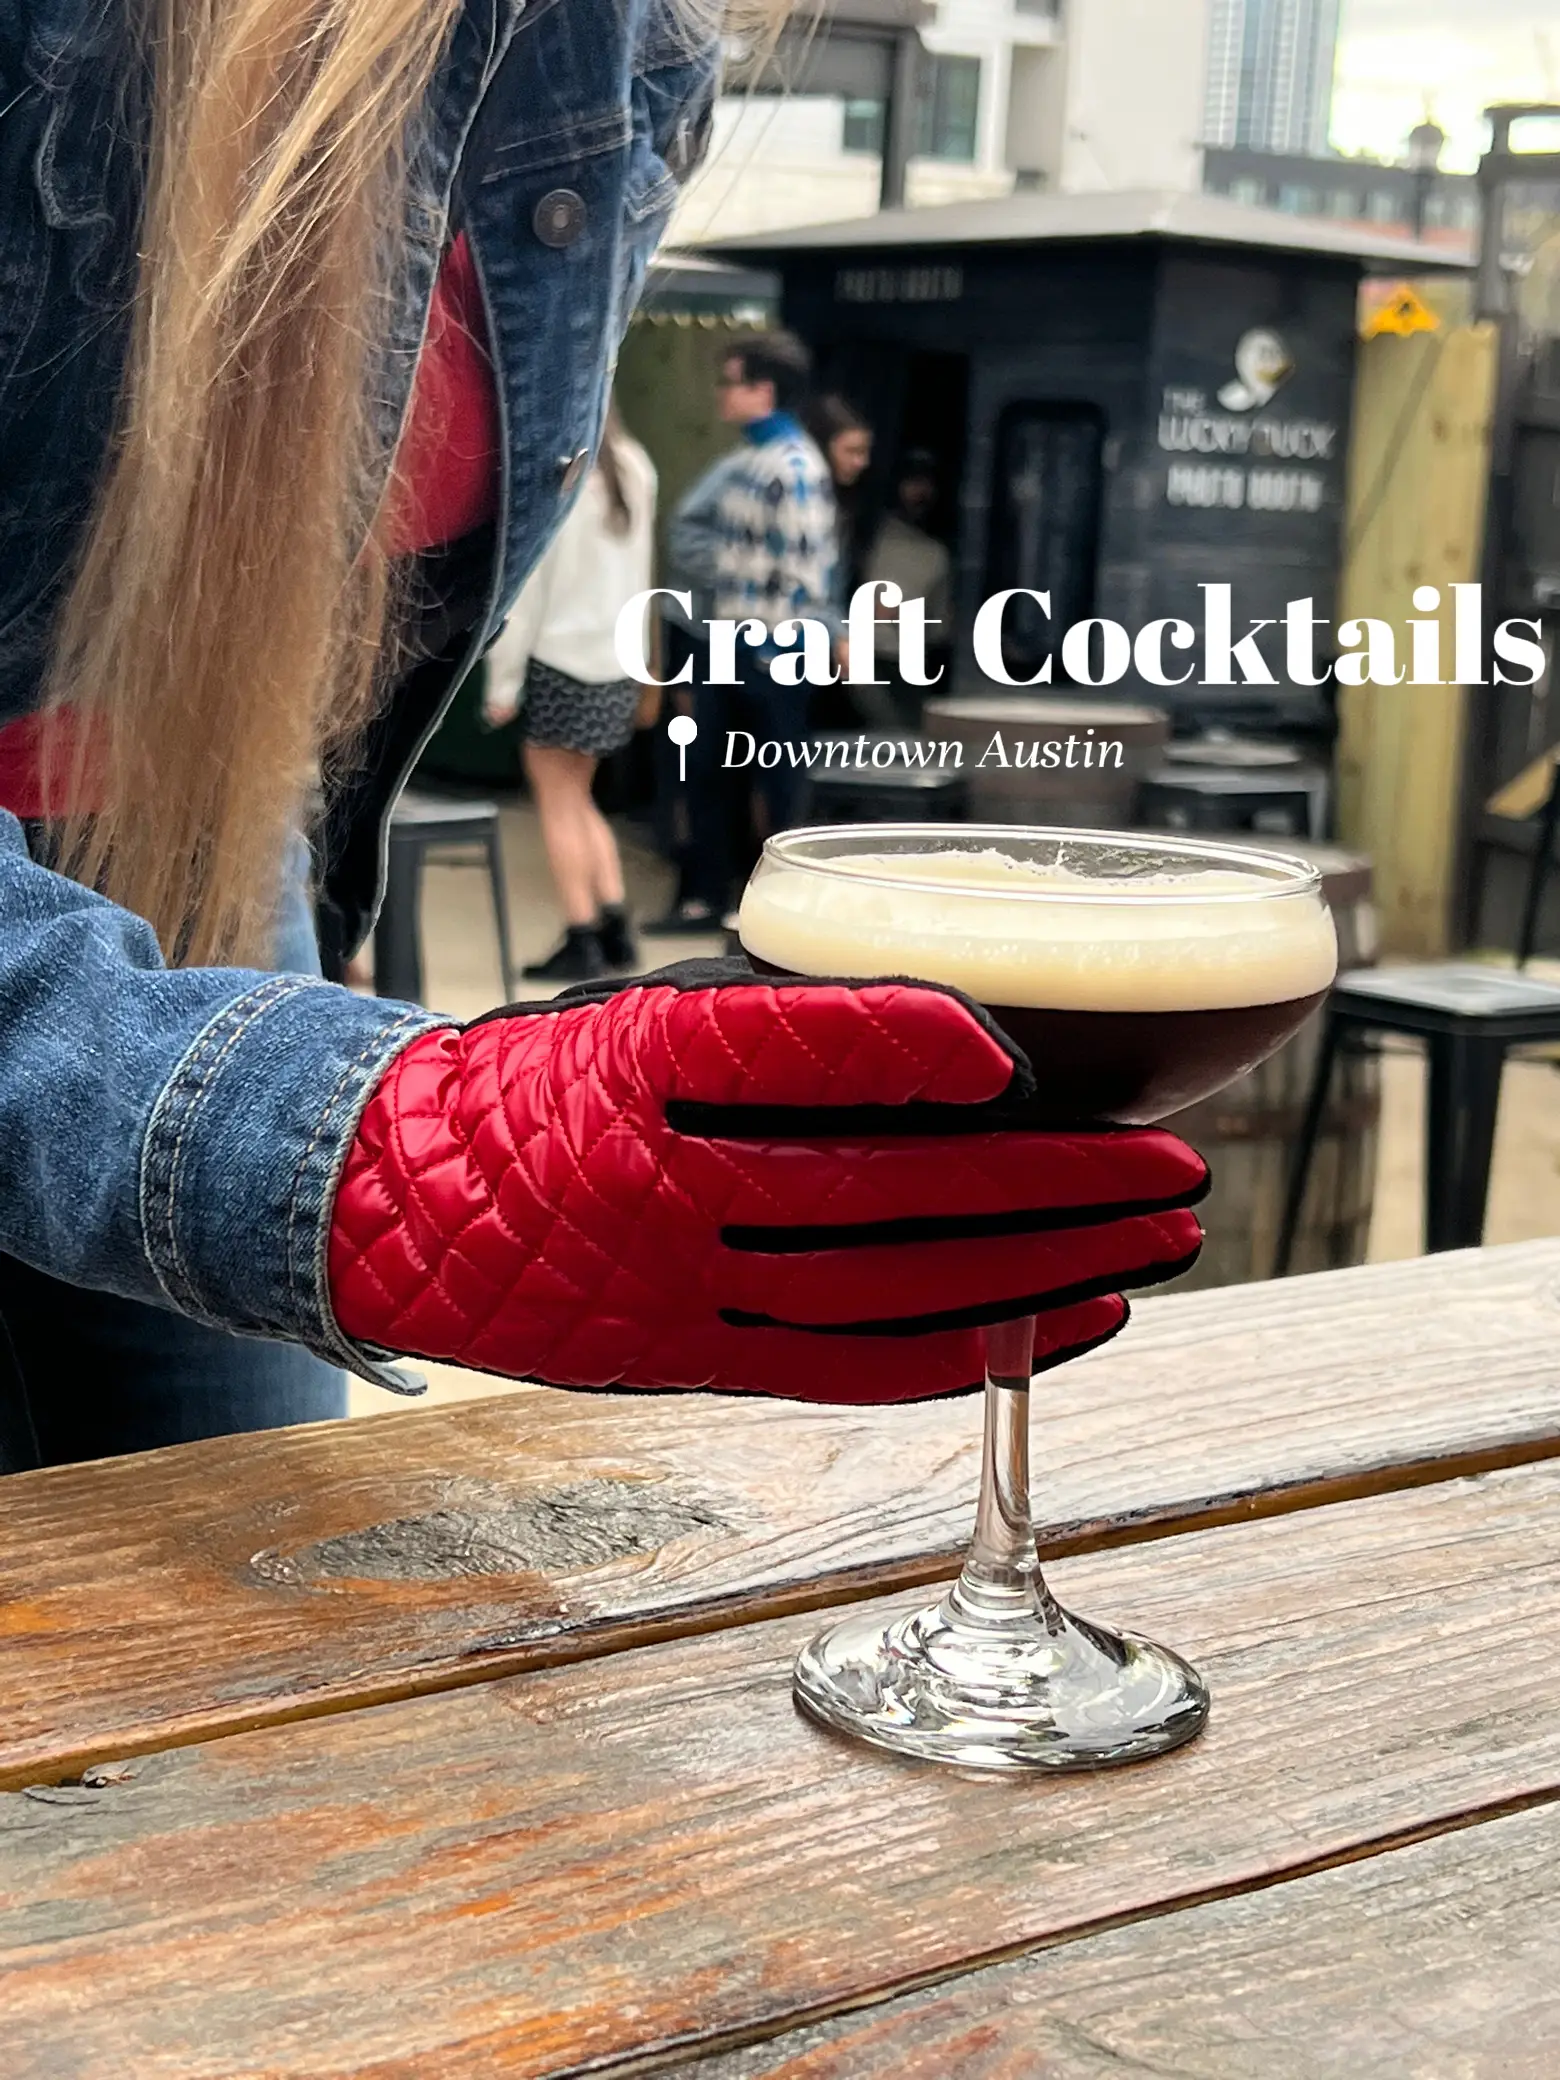 Hunting down the Best Craft Cocktails in Austin TX's images